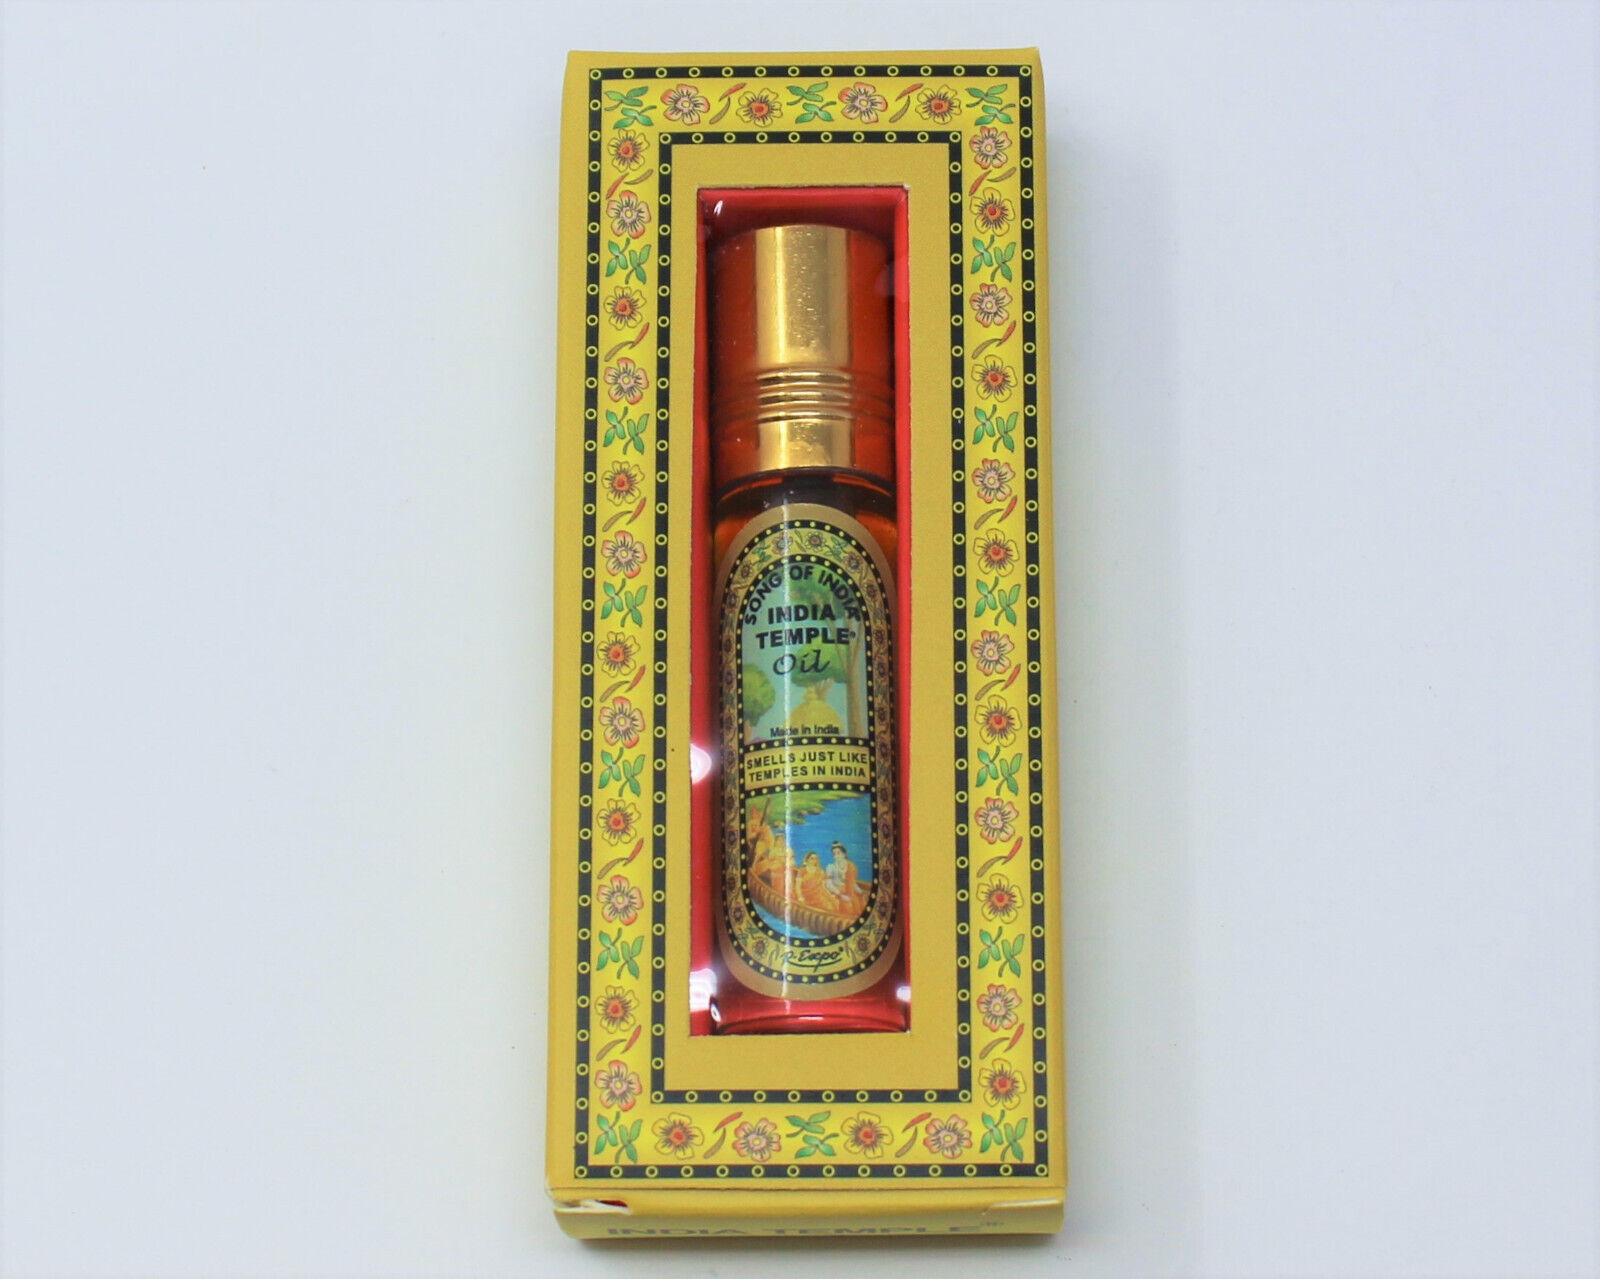 Song of India Temple Perfume Oil, 8 ml Bottle (Body Oils)